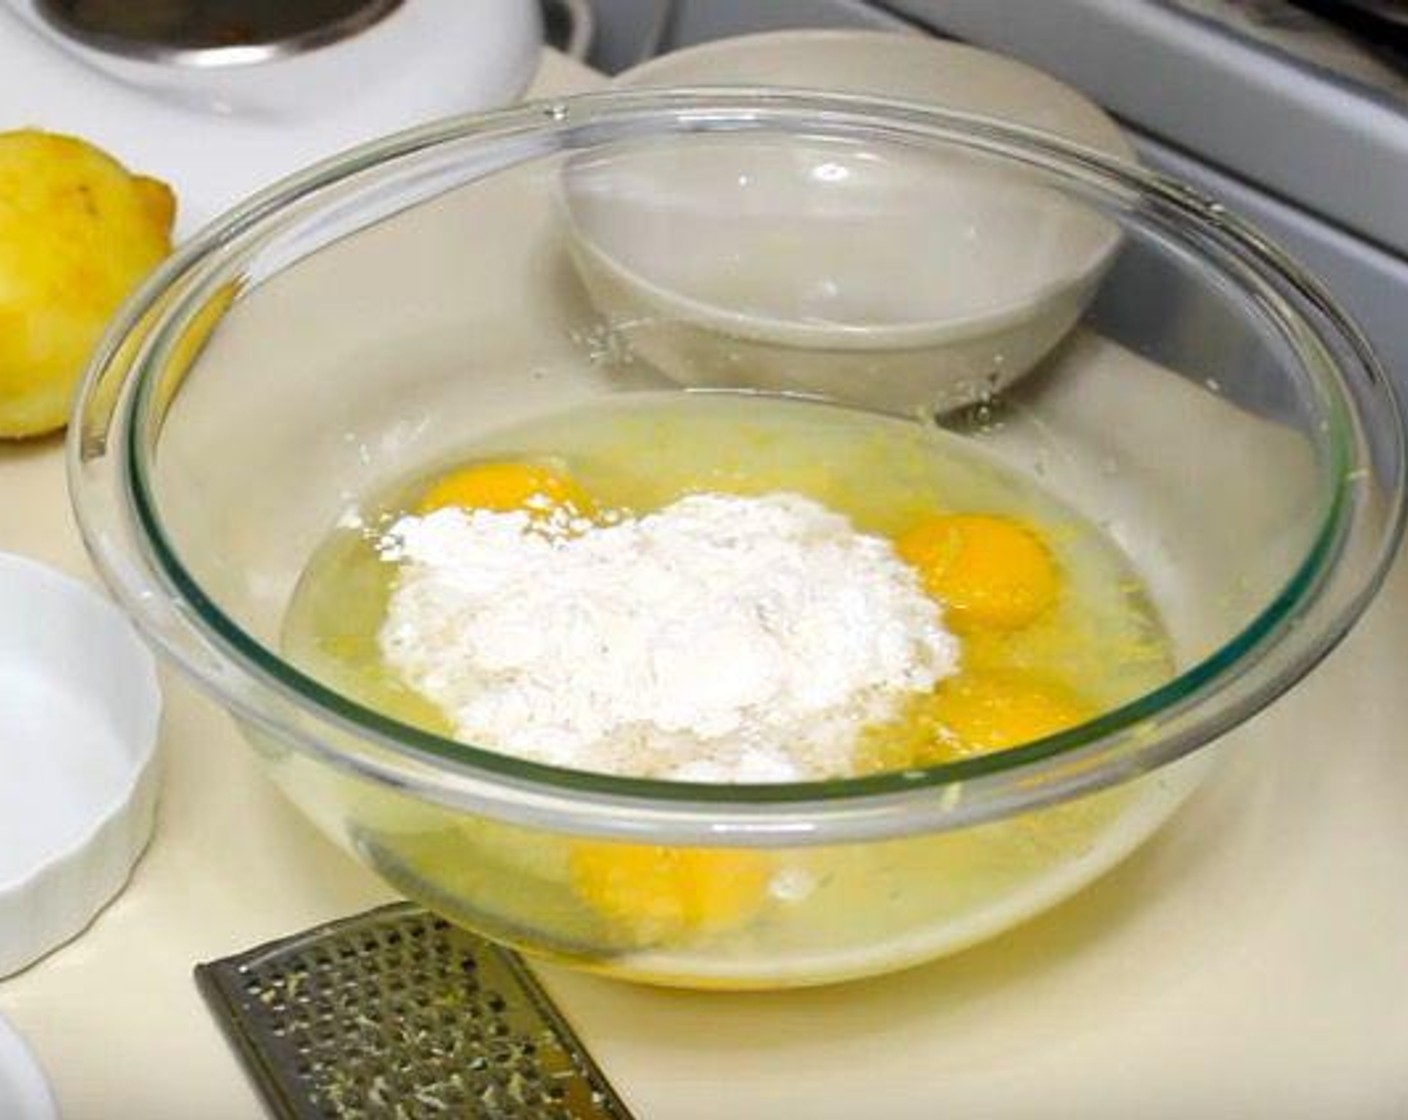 step 4 In a mixing bowl, add Eggs (3), Granulated Sugar (1 cup), zest and juice from Lemons (2 1/2 cups), Baking Powder (1/2 tsp), and All-Purpose Flour (1/2 cup). Mix until combined.